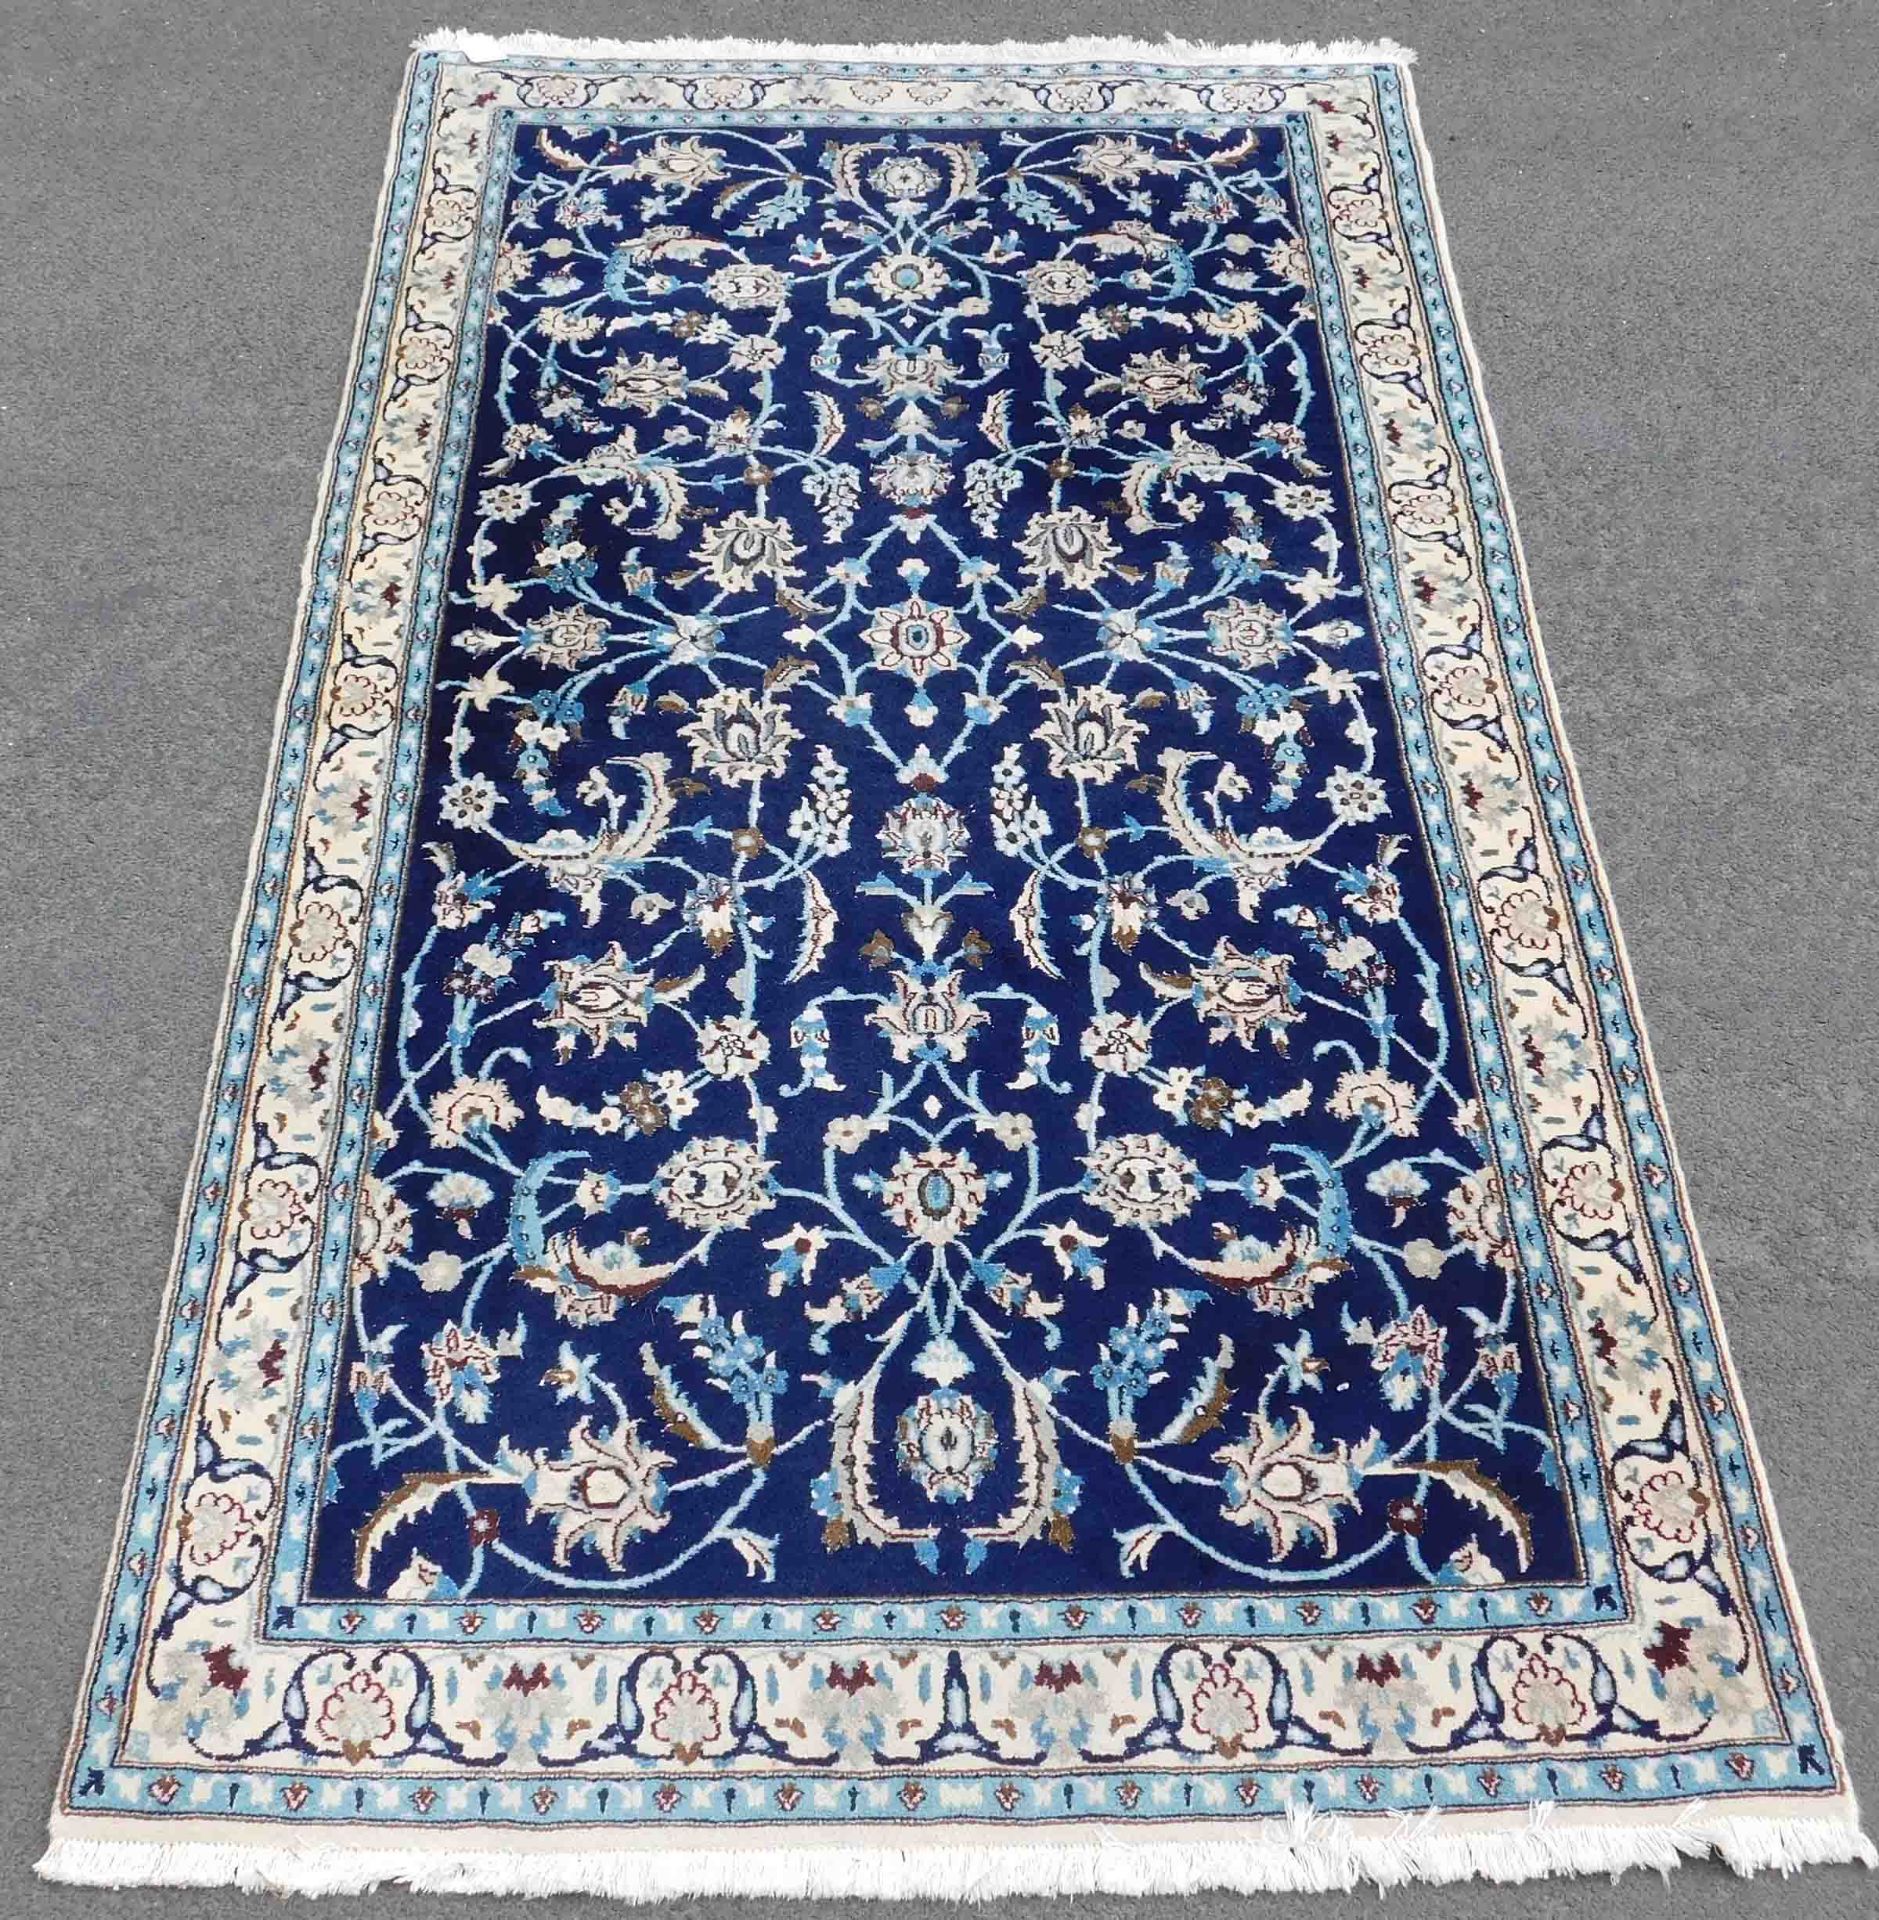 Nain Persian rug. Iran. Fine weave. Allover design.214 cm x 116 cm. Knotted by hand. Wool on wool.